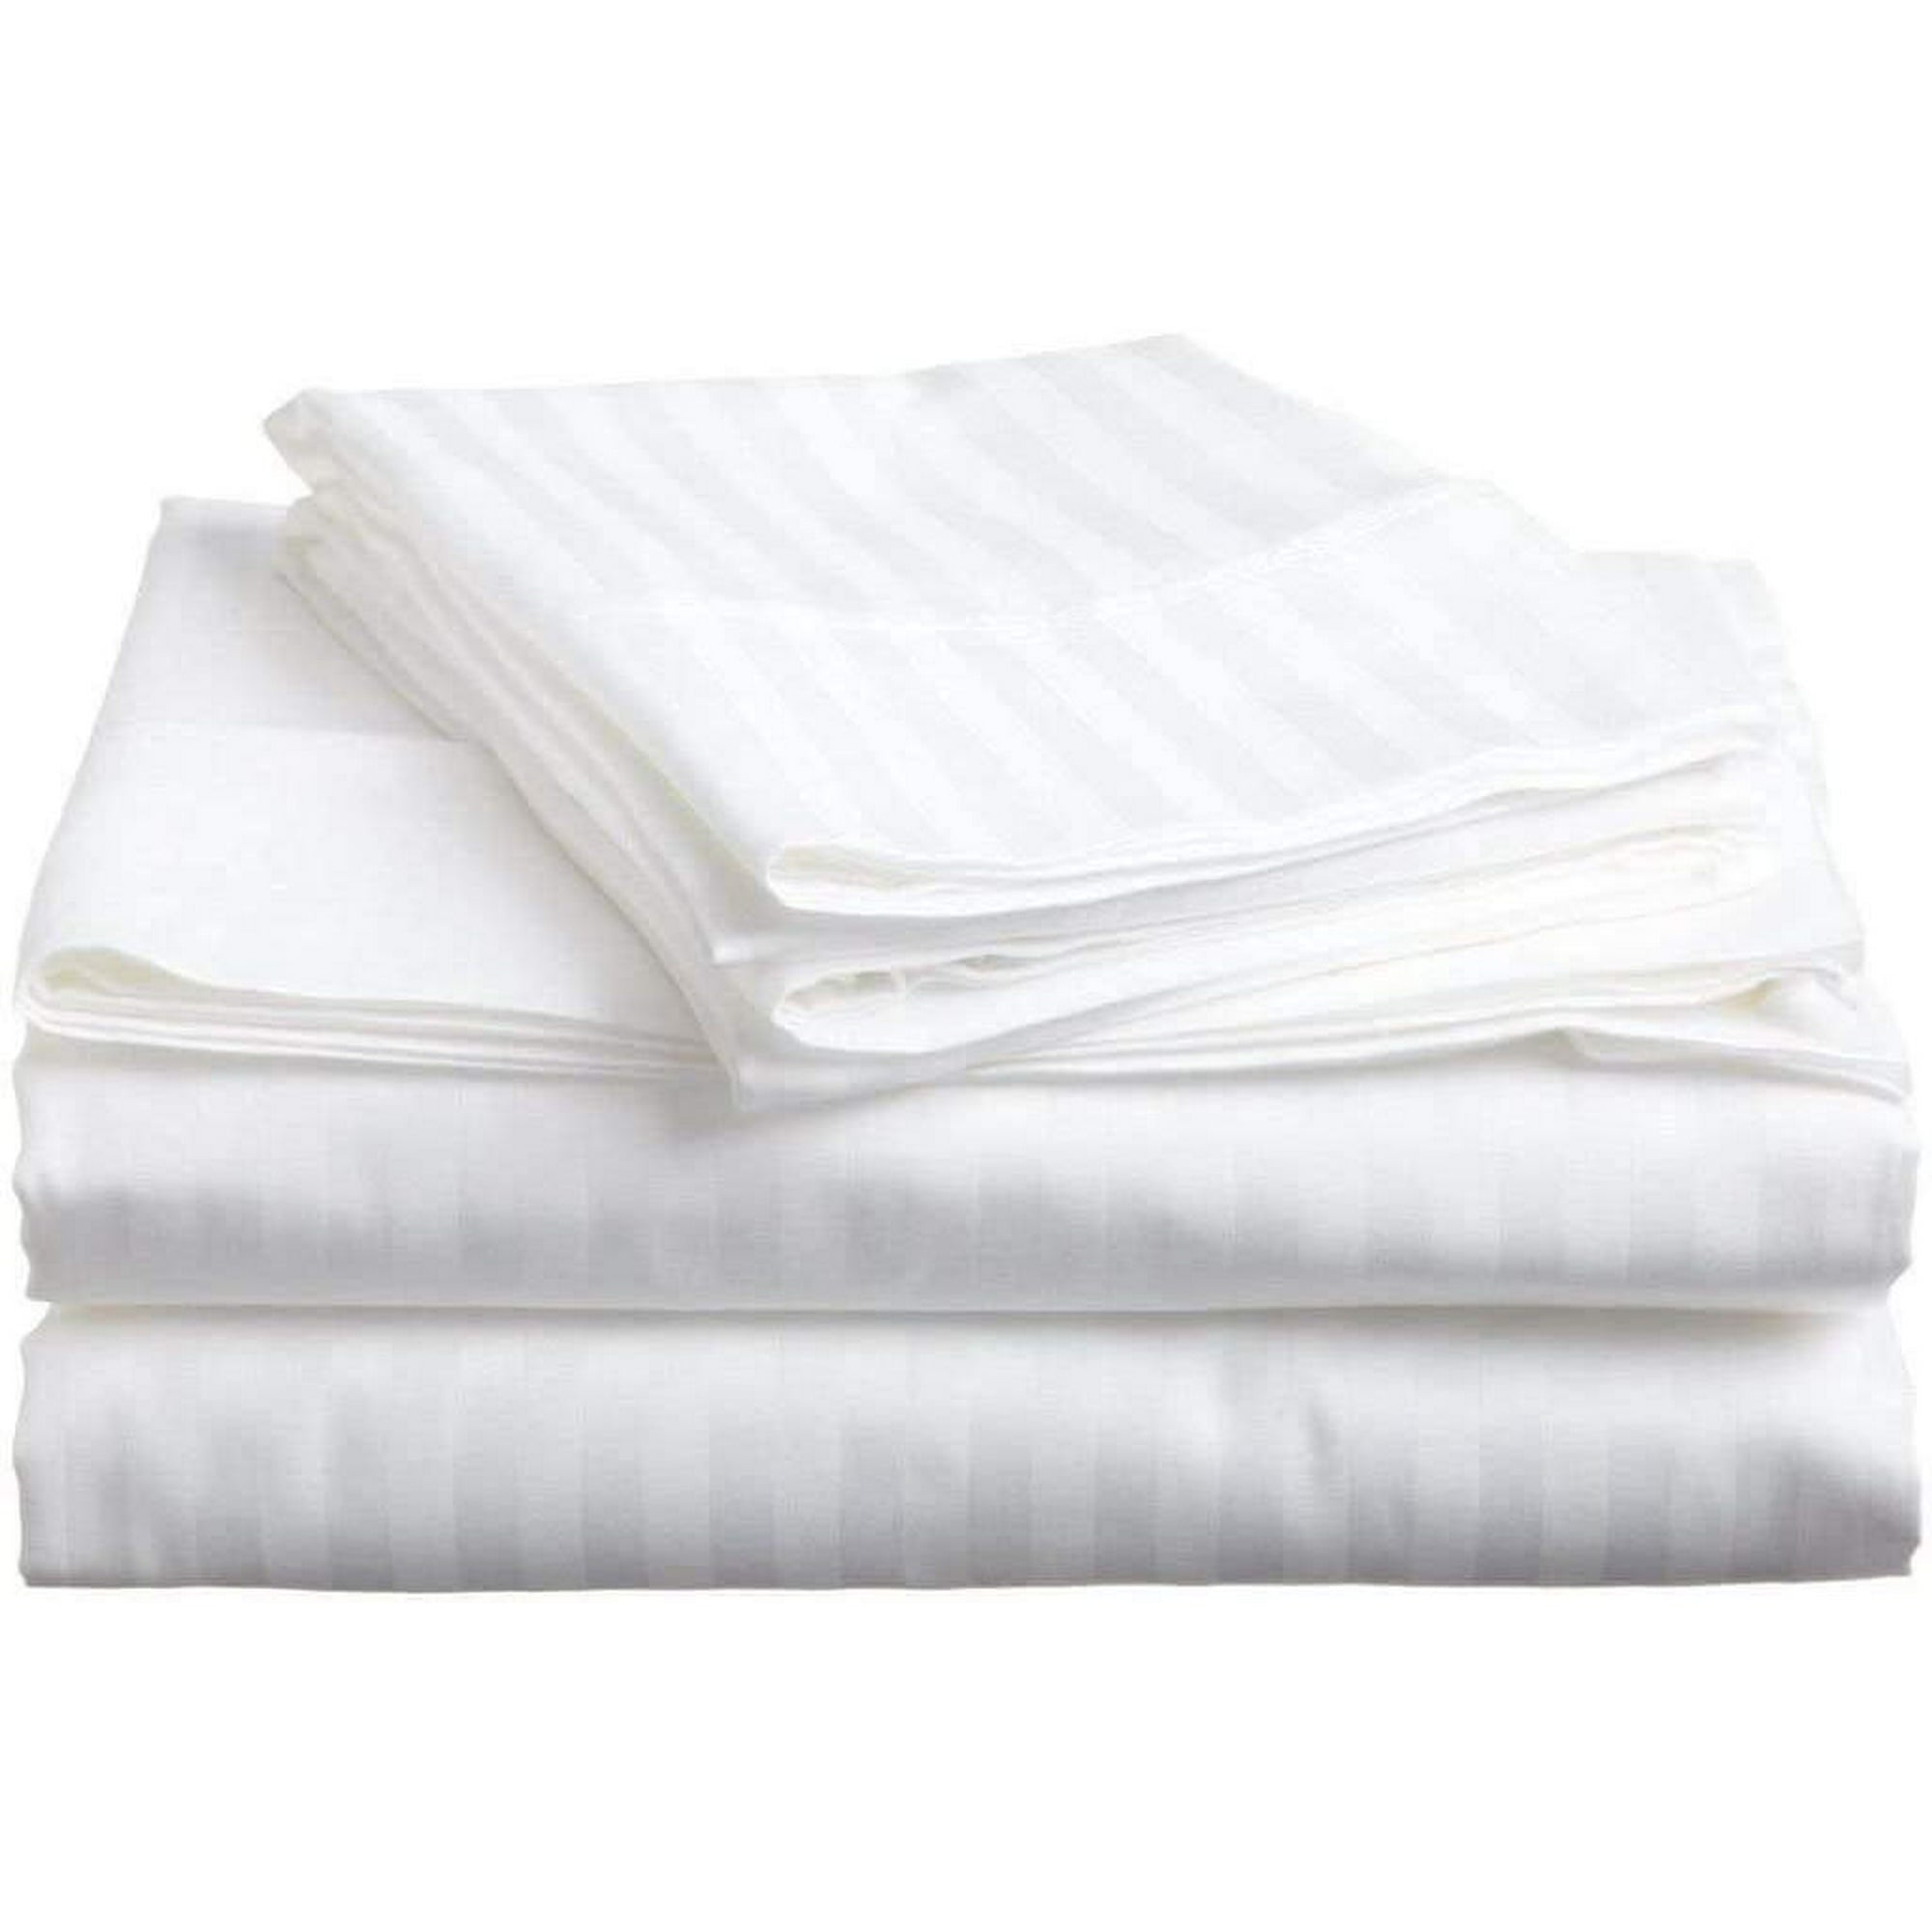 1000 Thread Count Bed Sheets 100% Egyptian Cotton Sheets Set - Queen Size Bedding Fitted & Flat sheet with 2Pc Pillowcase, Fits 9-12 Inches Deep Pocket ( Stripe, Classic White )